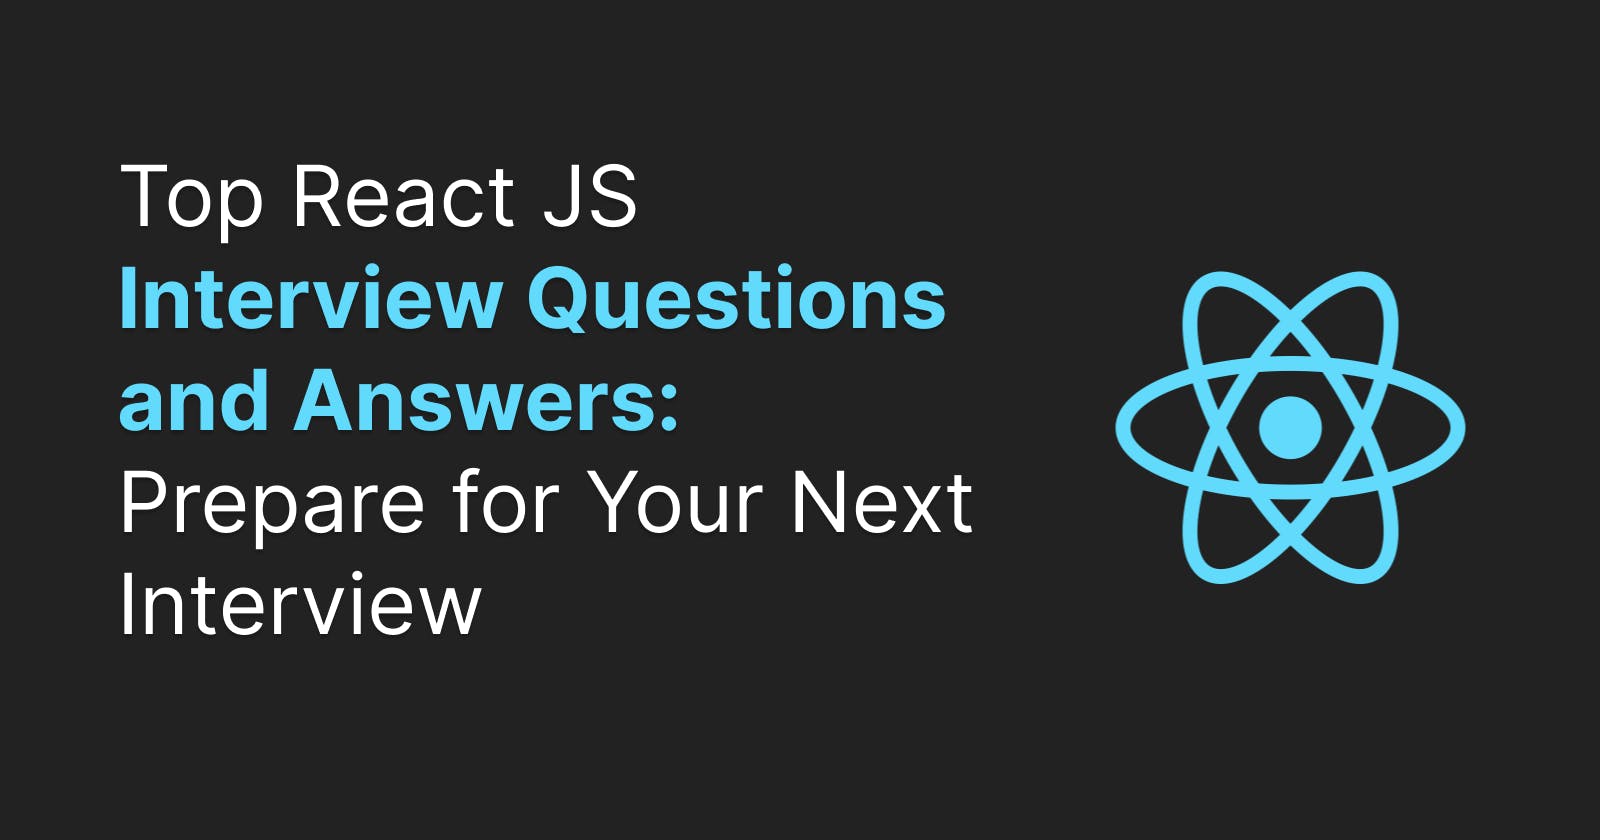 Top React JS Interview Questions and Answers: Prepare for Your Next Interview